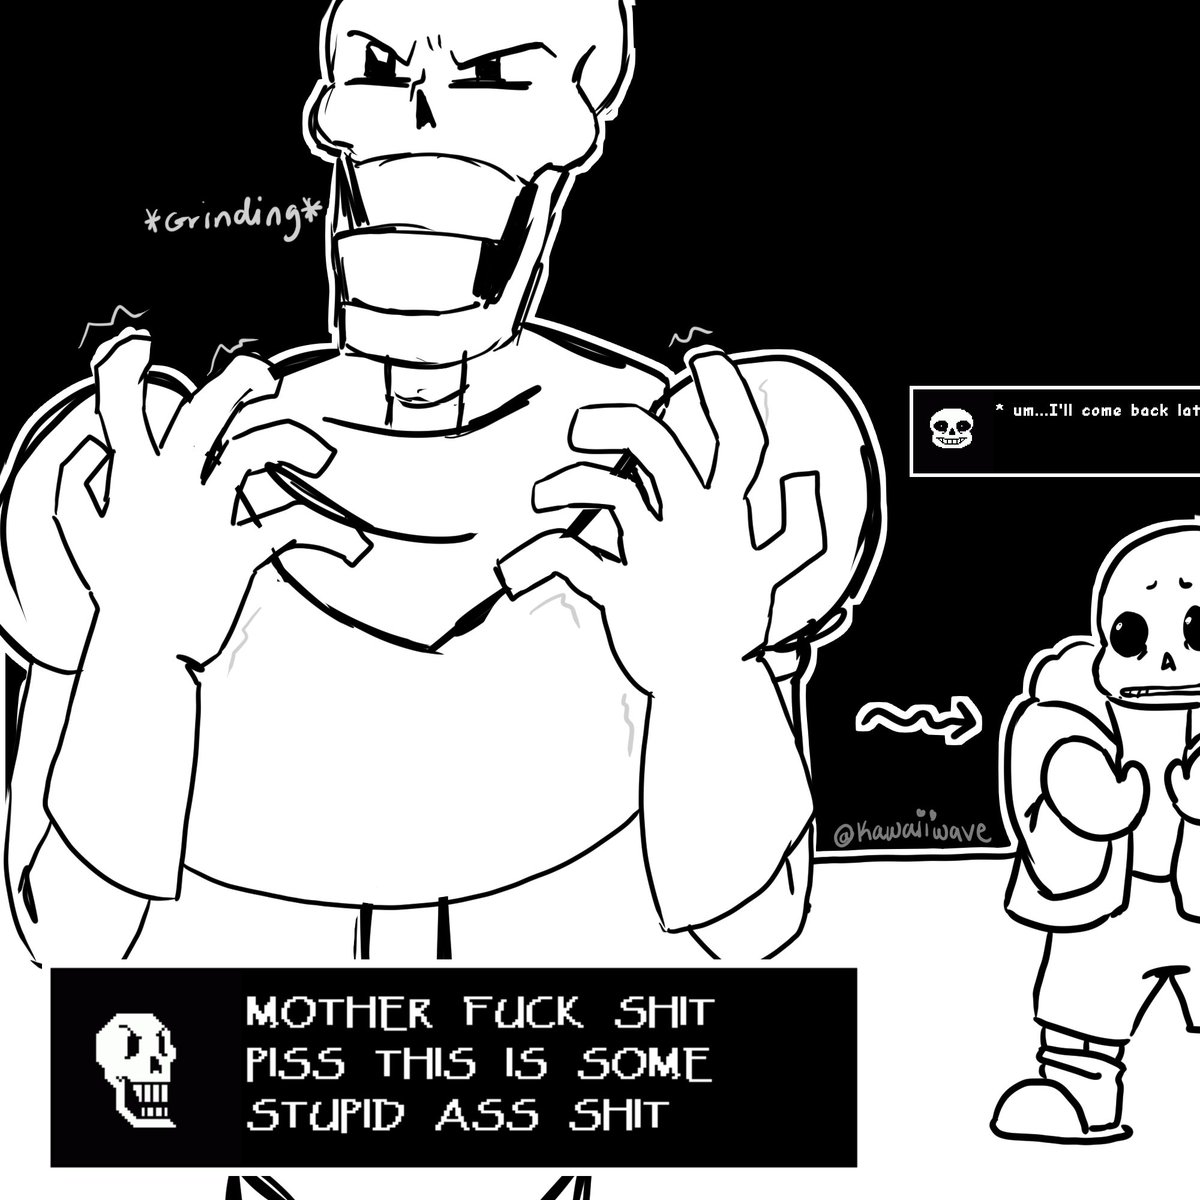 my contribution to #letpapyrussayfuckday tbh he deserves his occasional cursing fit. 

#papyrus #undertale #letpapyrussayfuck #letpapyrussayfuckday #cursing #undertaleFanart